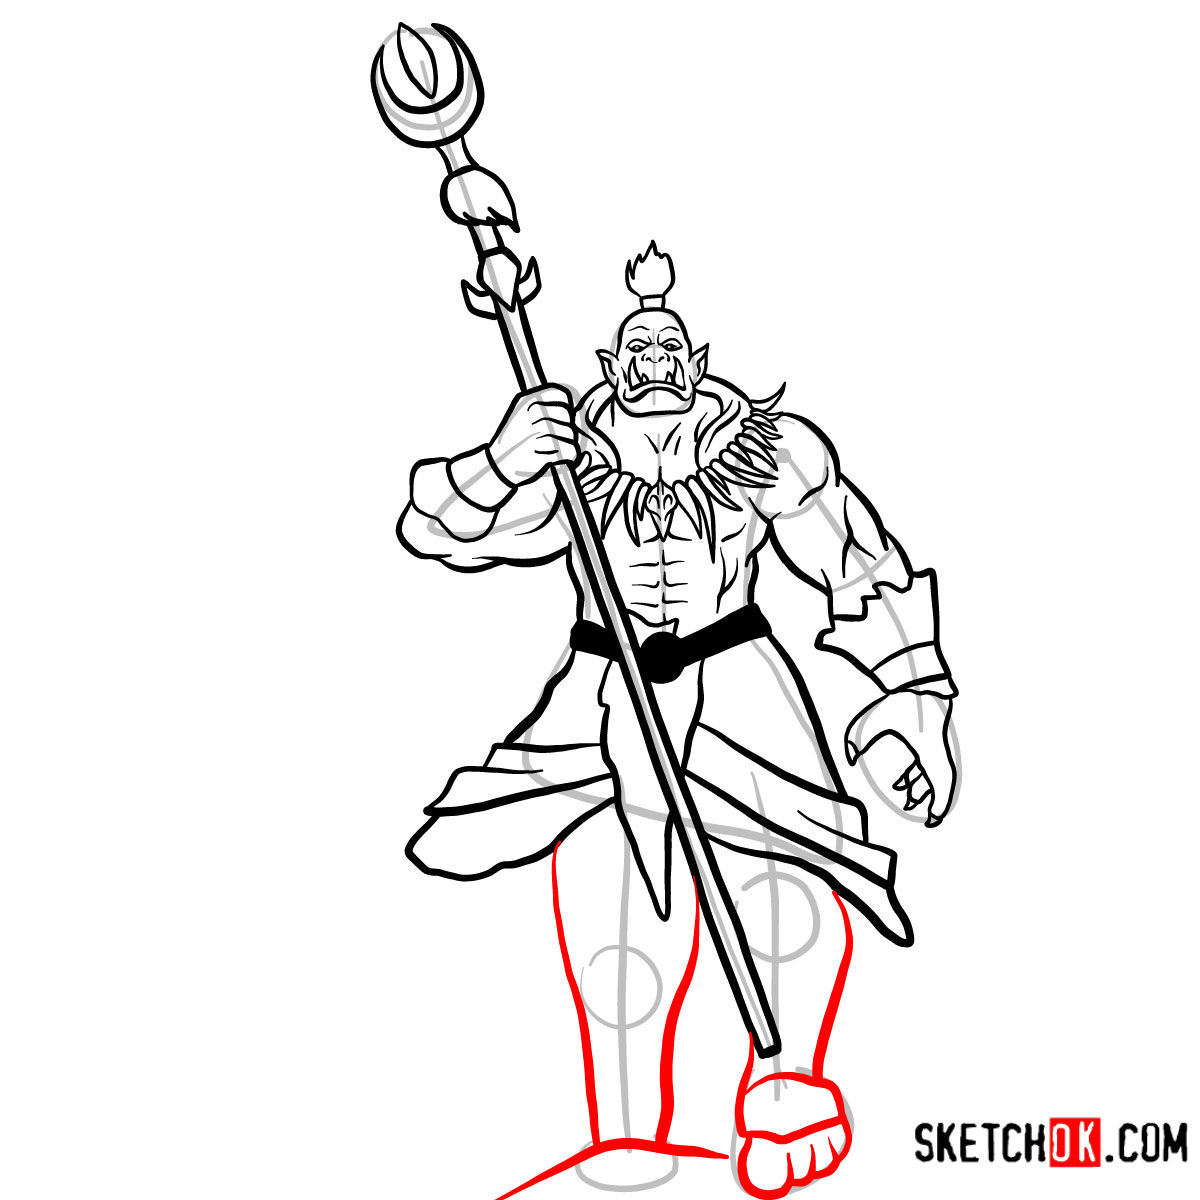 How to draw Ner'zhul | World of Warcraft - step 14